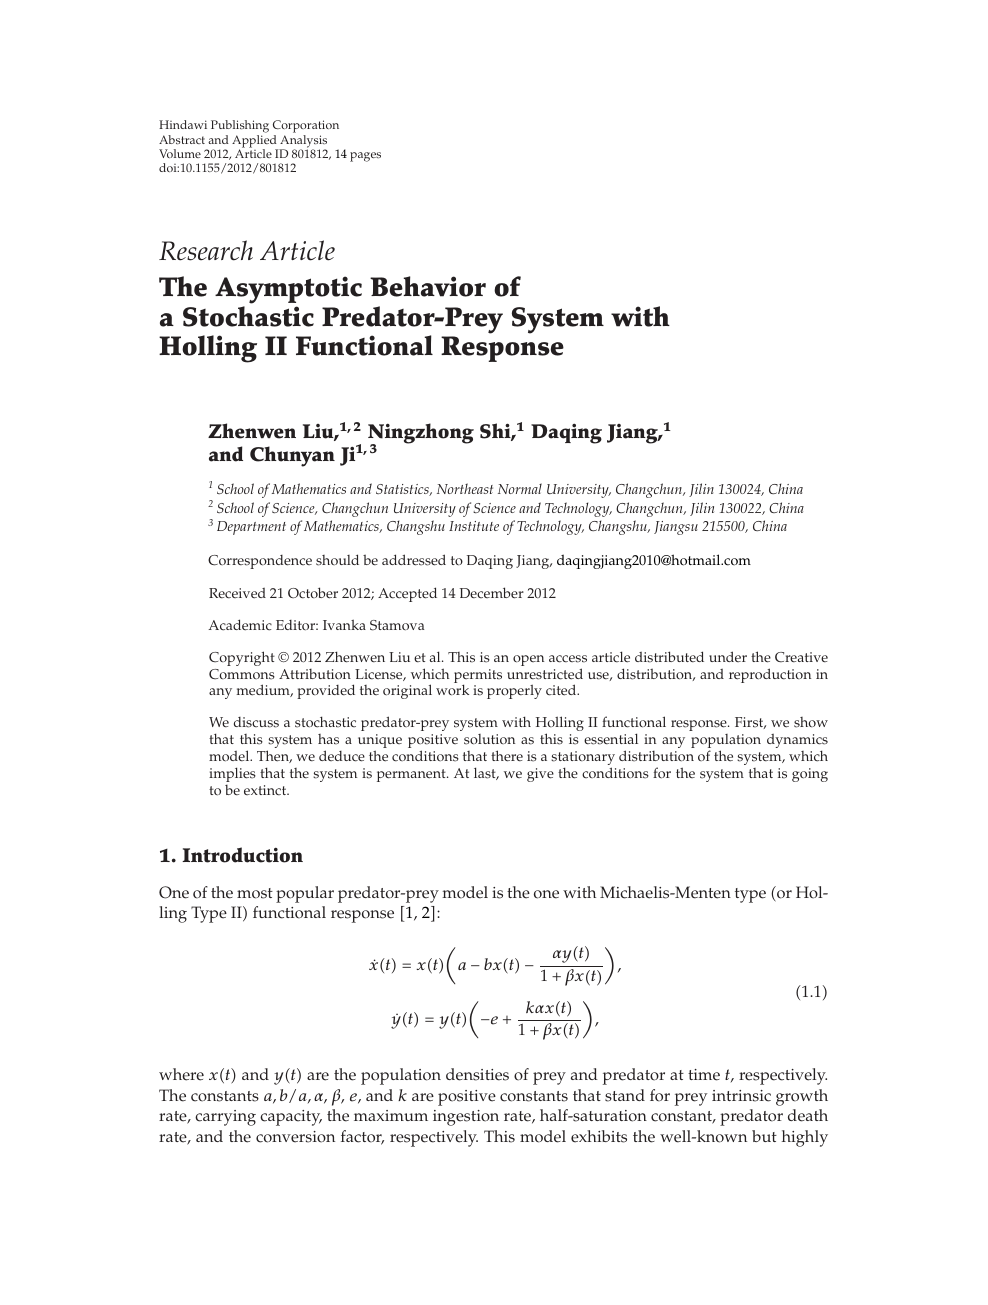 The Asymptotic Behavior Of A Stochastic Predator Prey System With Holling Ii Functional Response Topic Of Research Paper In Mathematics Download Scholarly Article Pdf And Read For Free On Cyberleninka Open Science